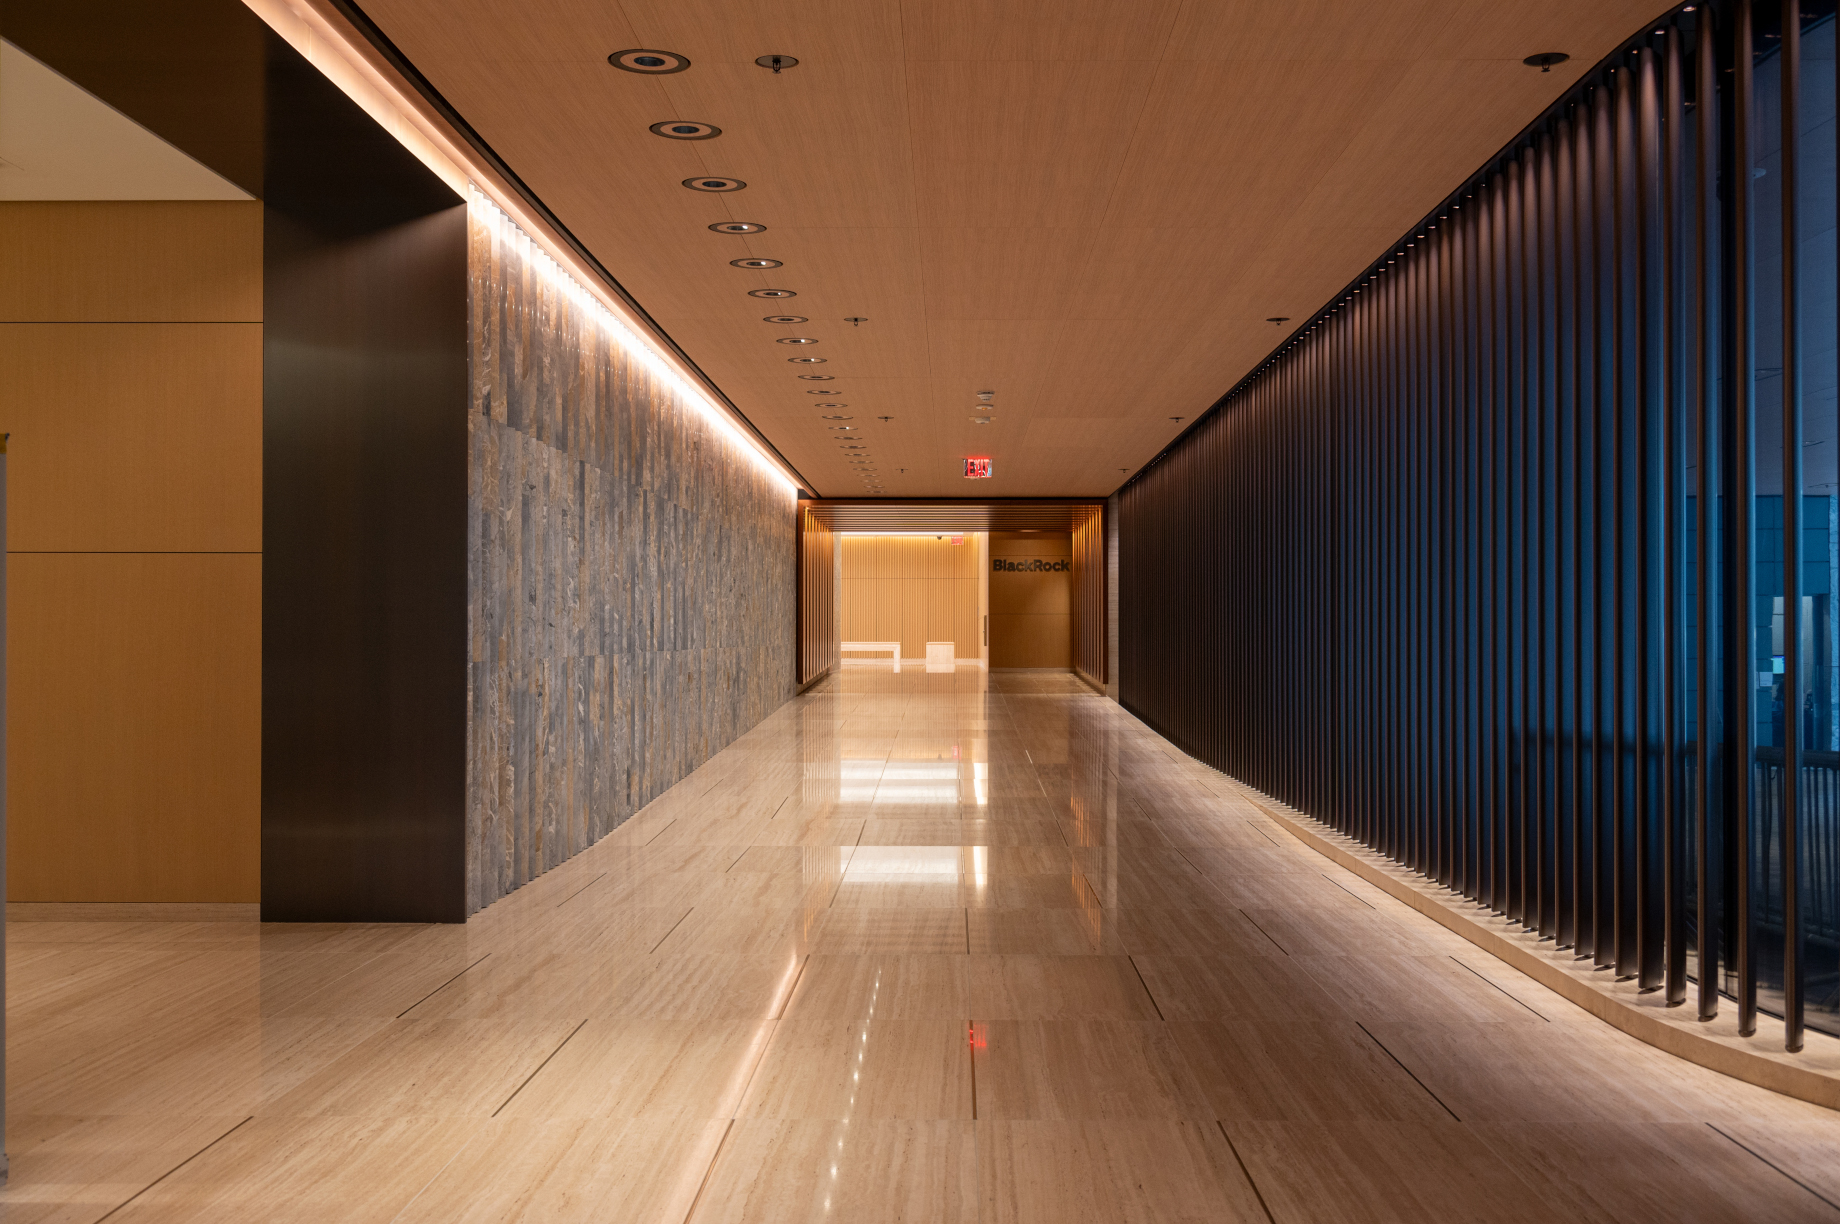 A hallway with a wood ceiling and wood floor finish